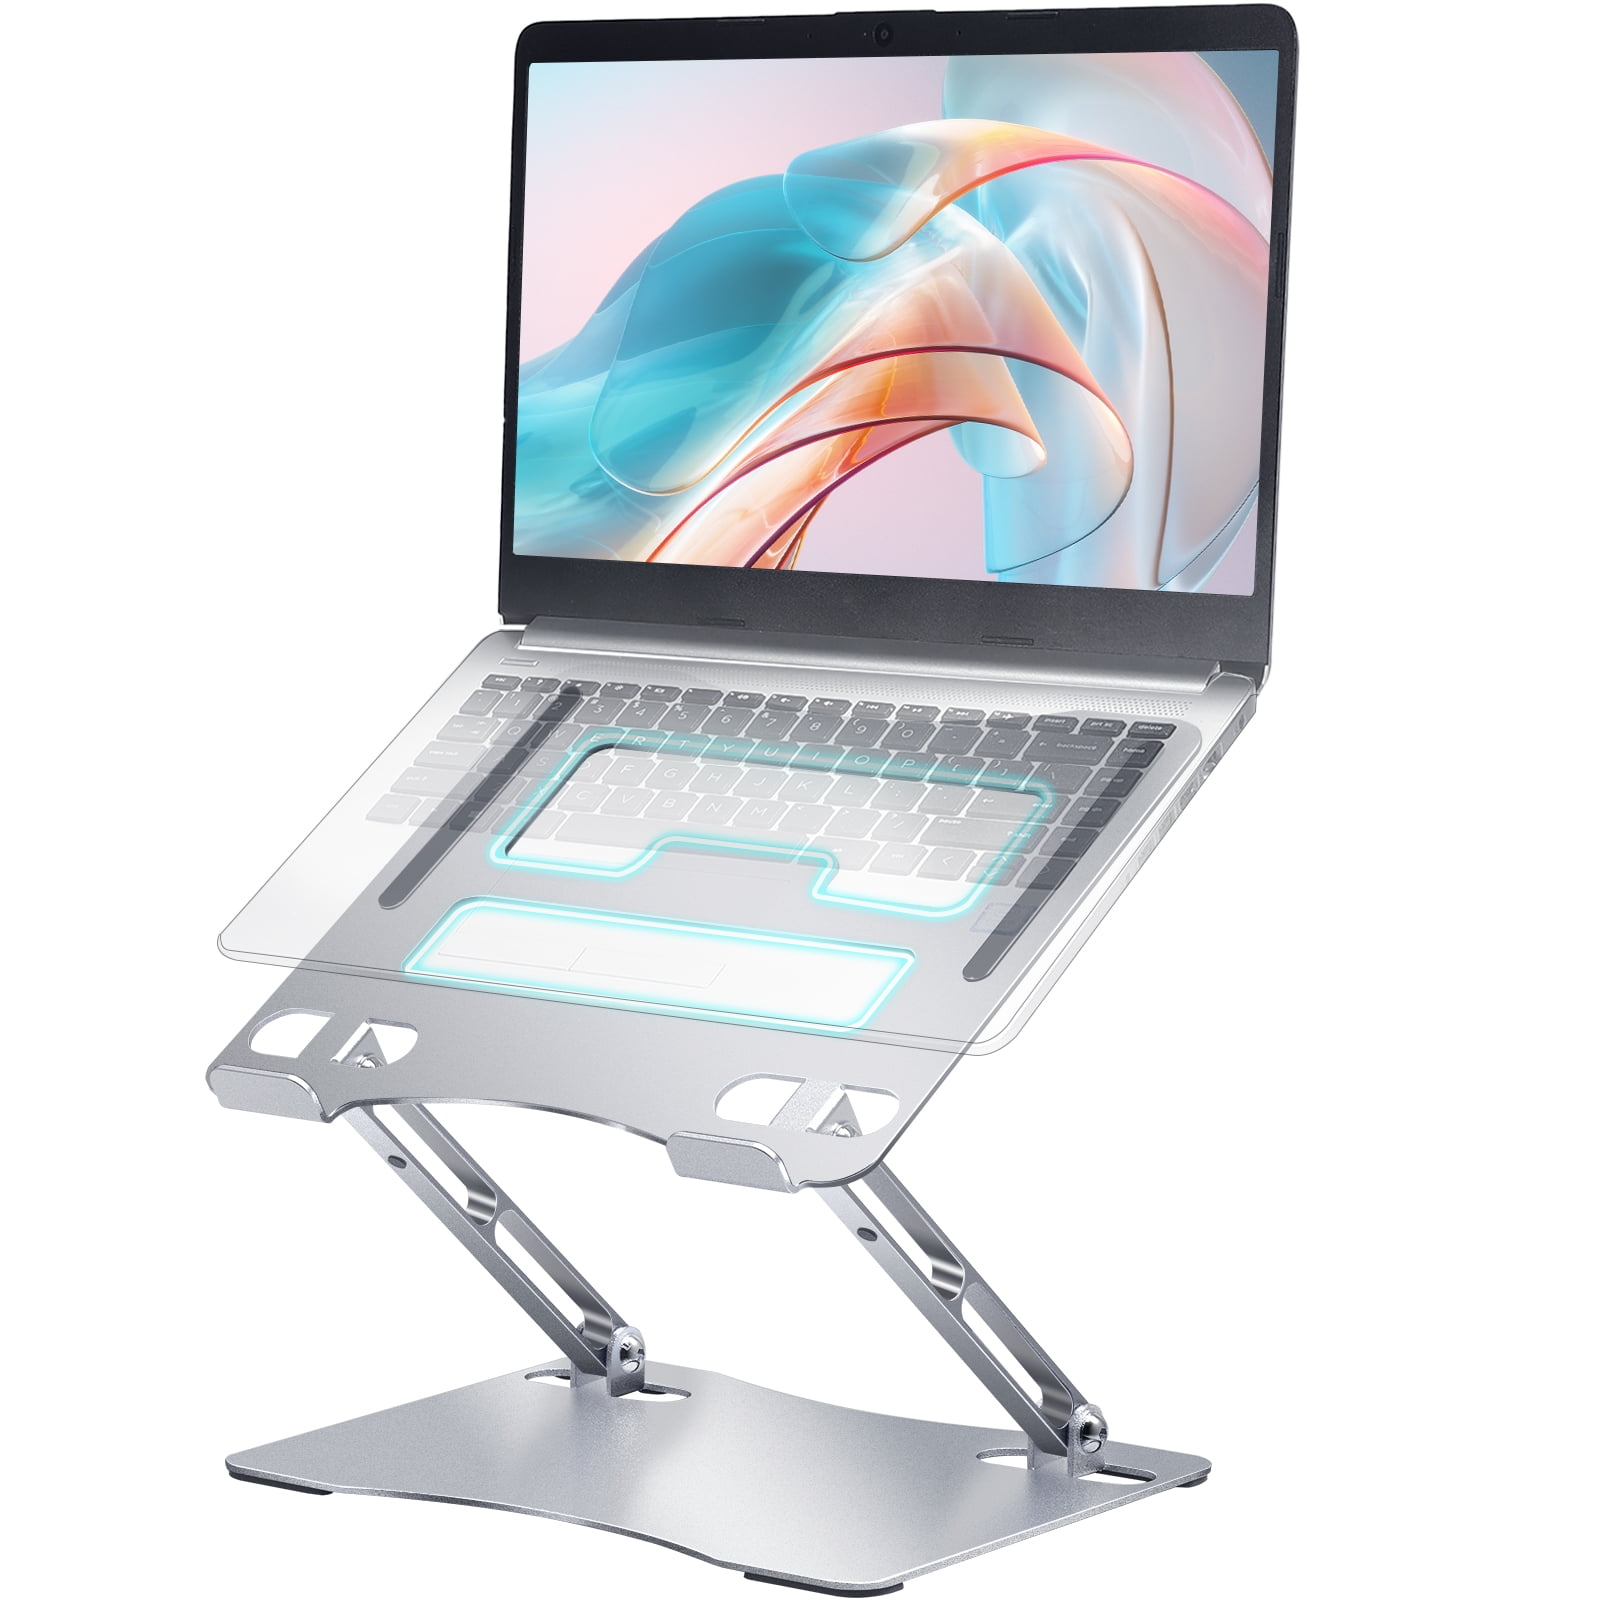  Portable Invisible Laptop Stand-2PCS,SUNTAIHO Mini Aluminum  Cooling Pad,Computer Keyboard Mount Kickstand,Ergonomic Lightweight Laptop  Desk Stand for MacBook Pro/Air, Lenovo,12-17 Inches : Electronics